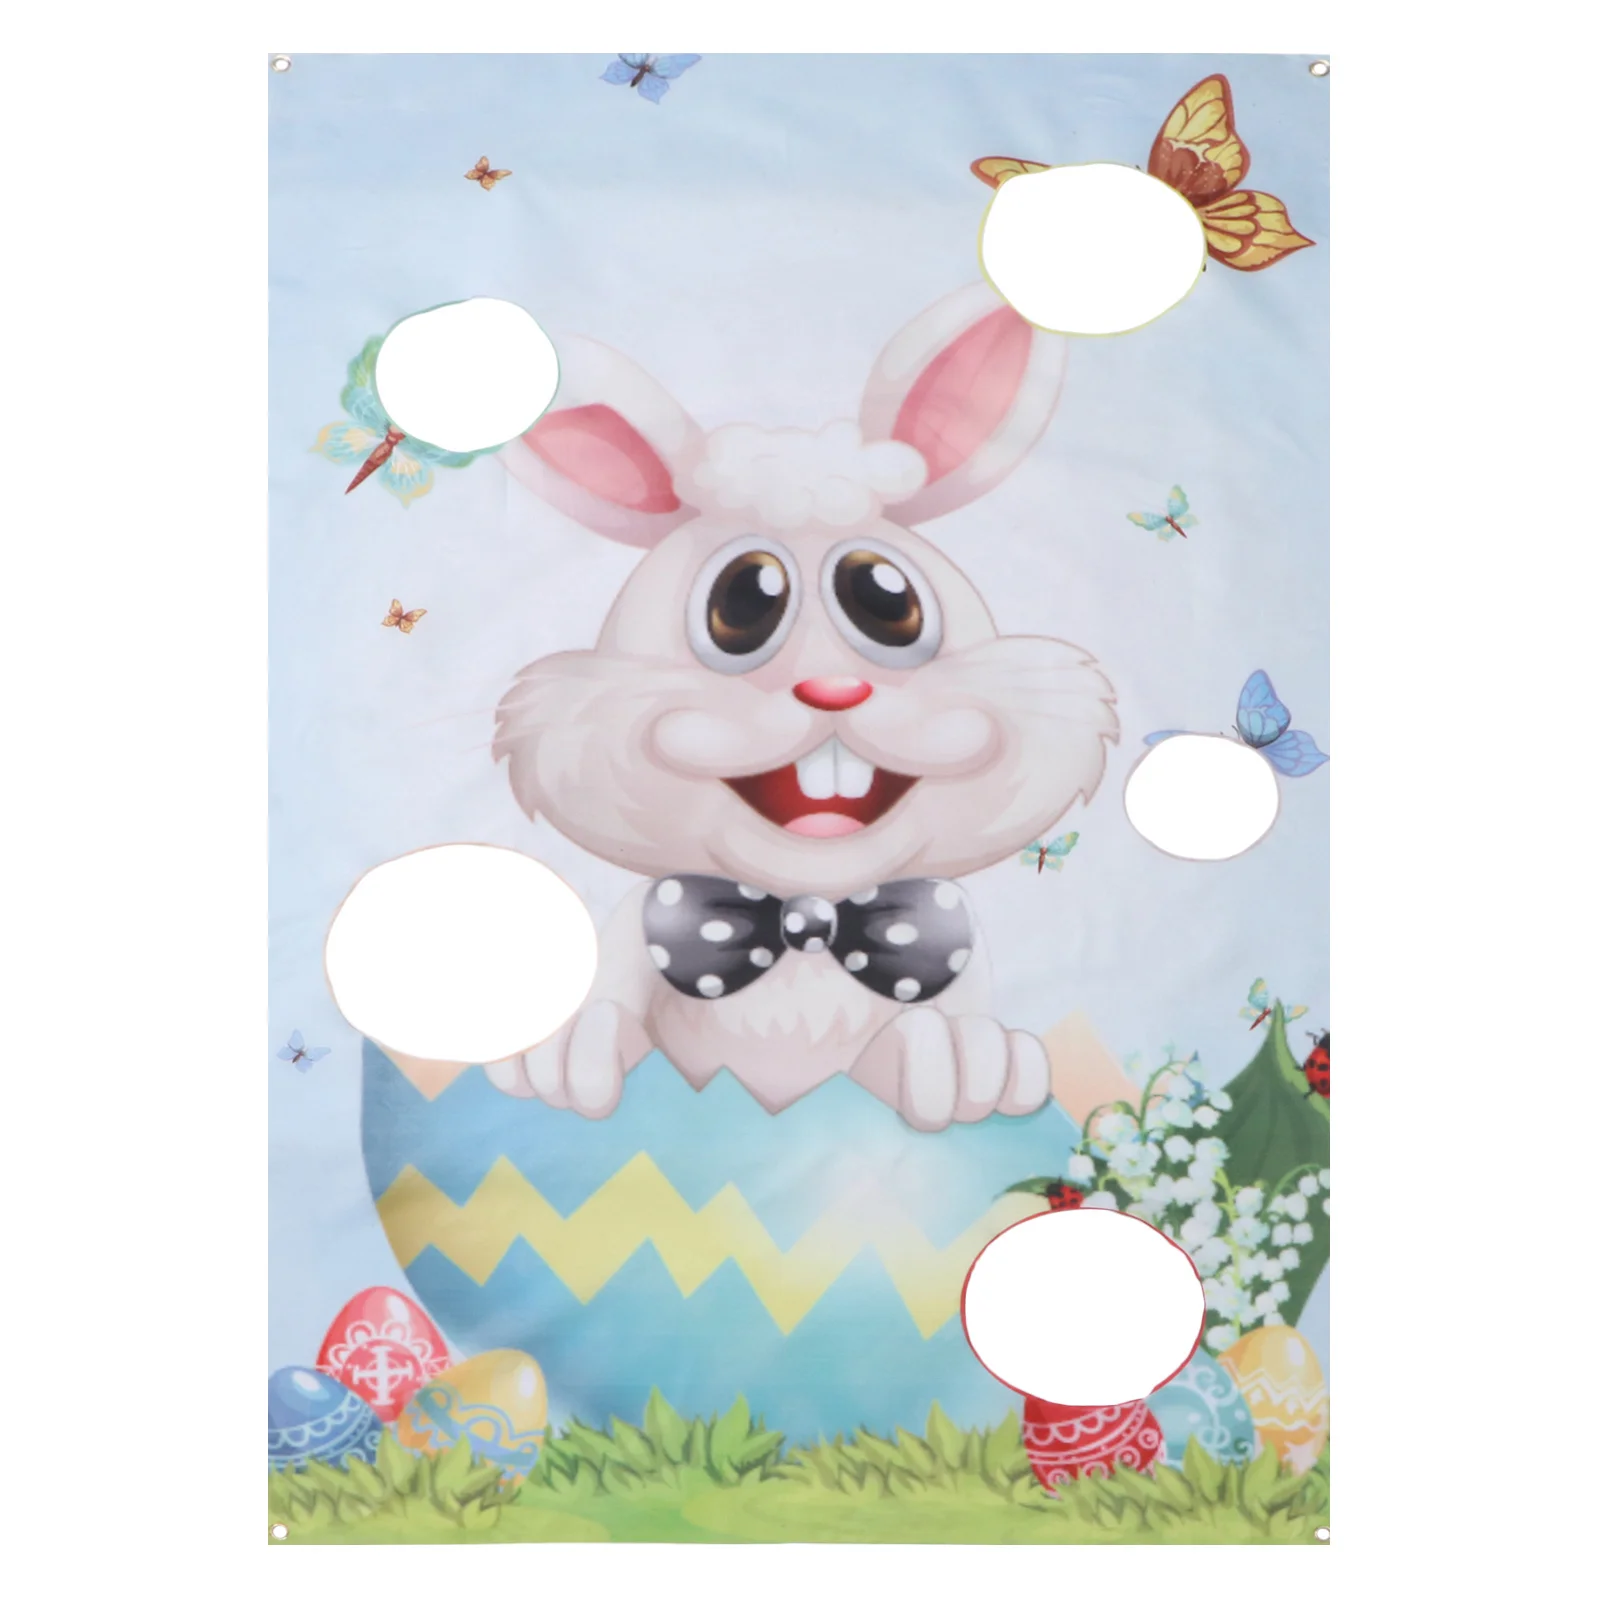 

Easter Beanbag Flag Yard Game Supplies Bunny Themed Banner Kids Sports Toys Rabbit Toss Toddler Outdoor Decorations